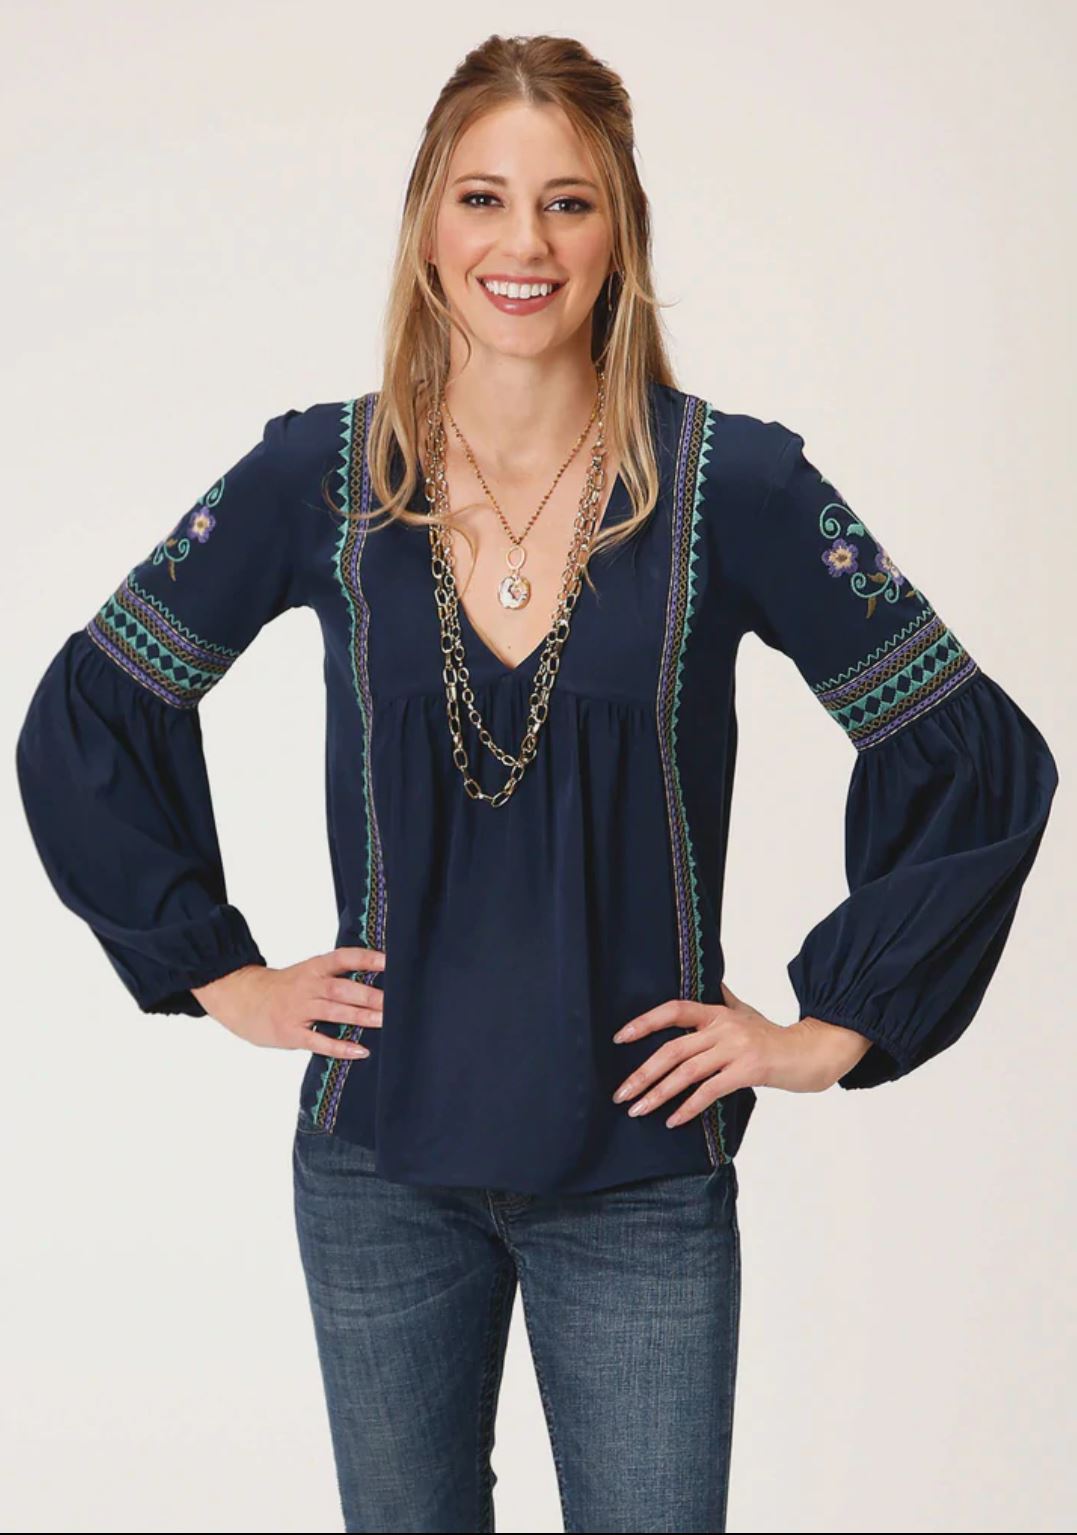 03-050-0565-7040BU Roper Women's Embroidered Blouse